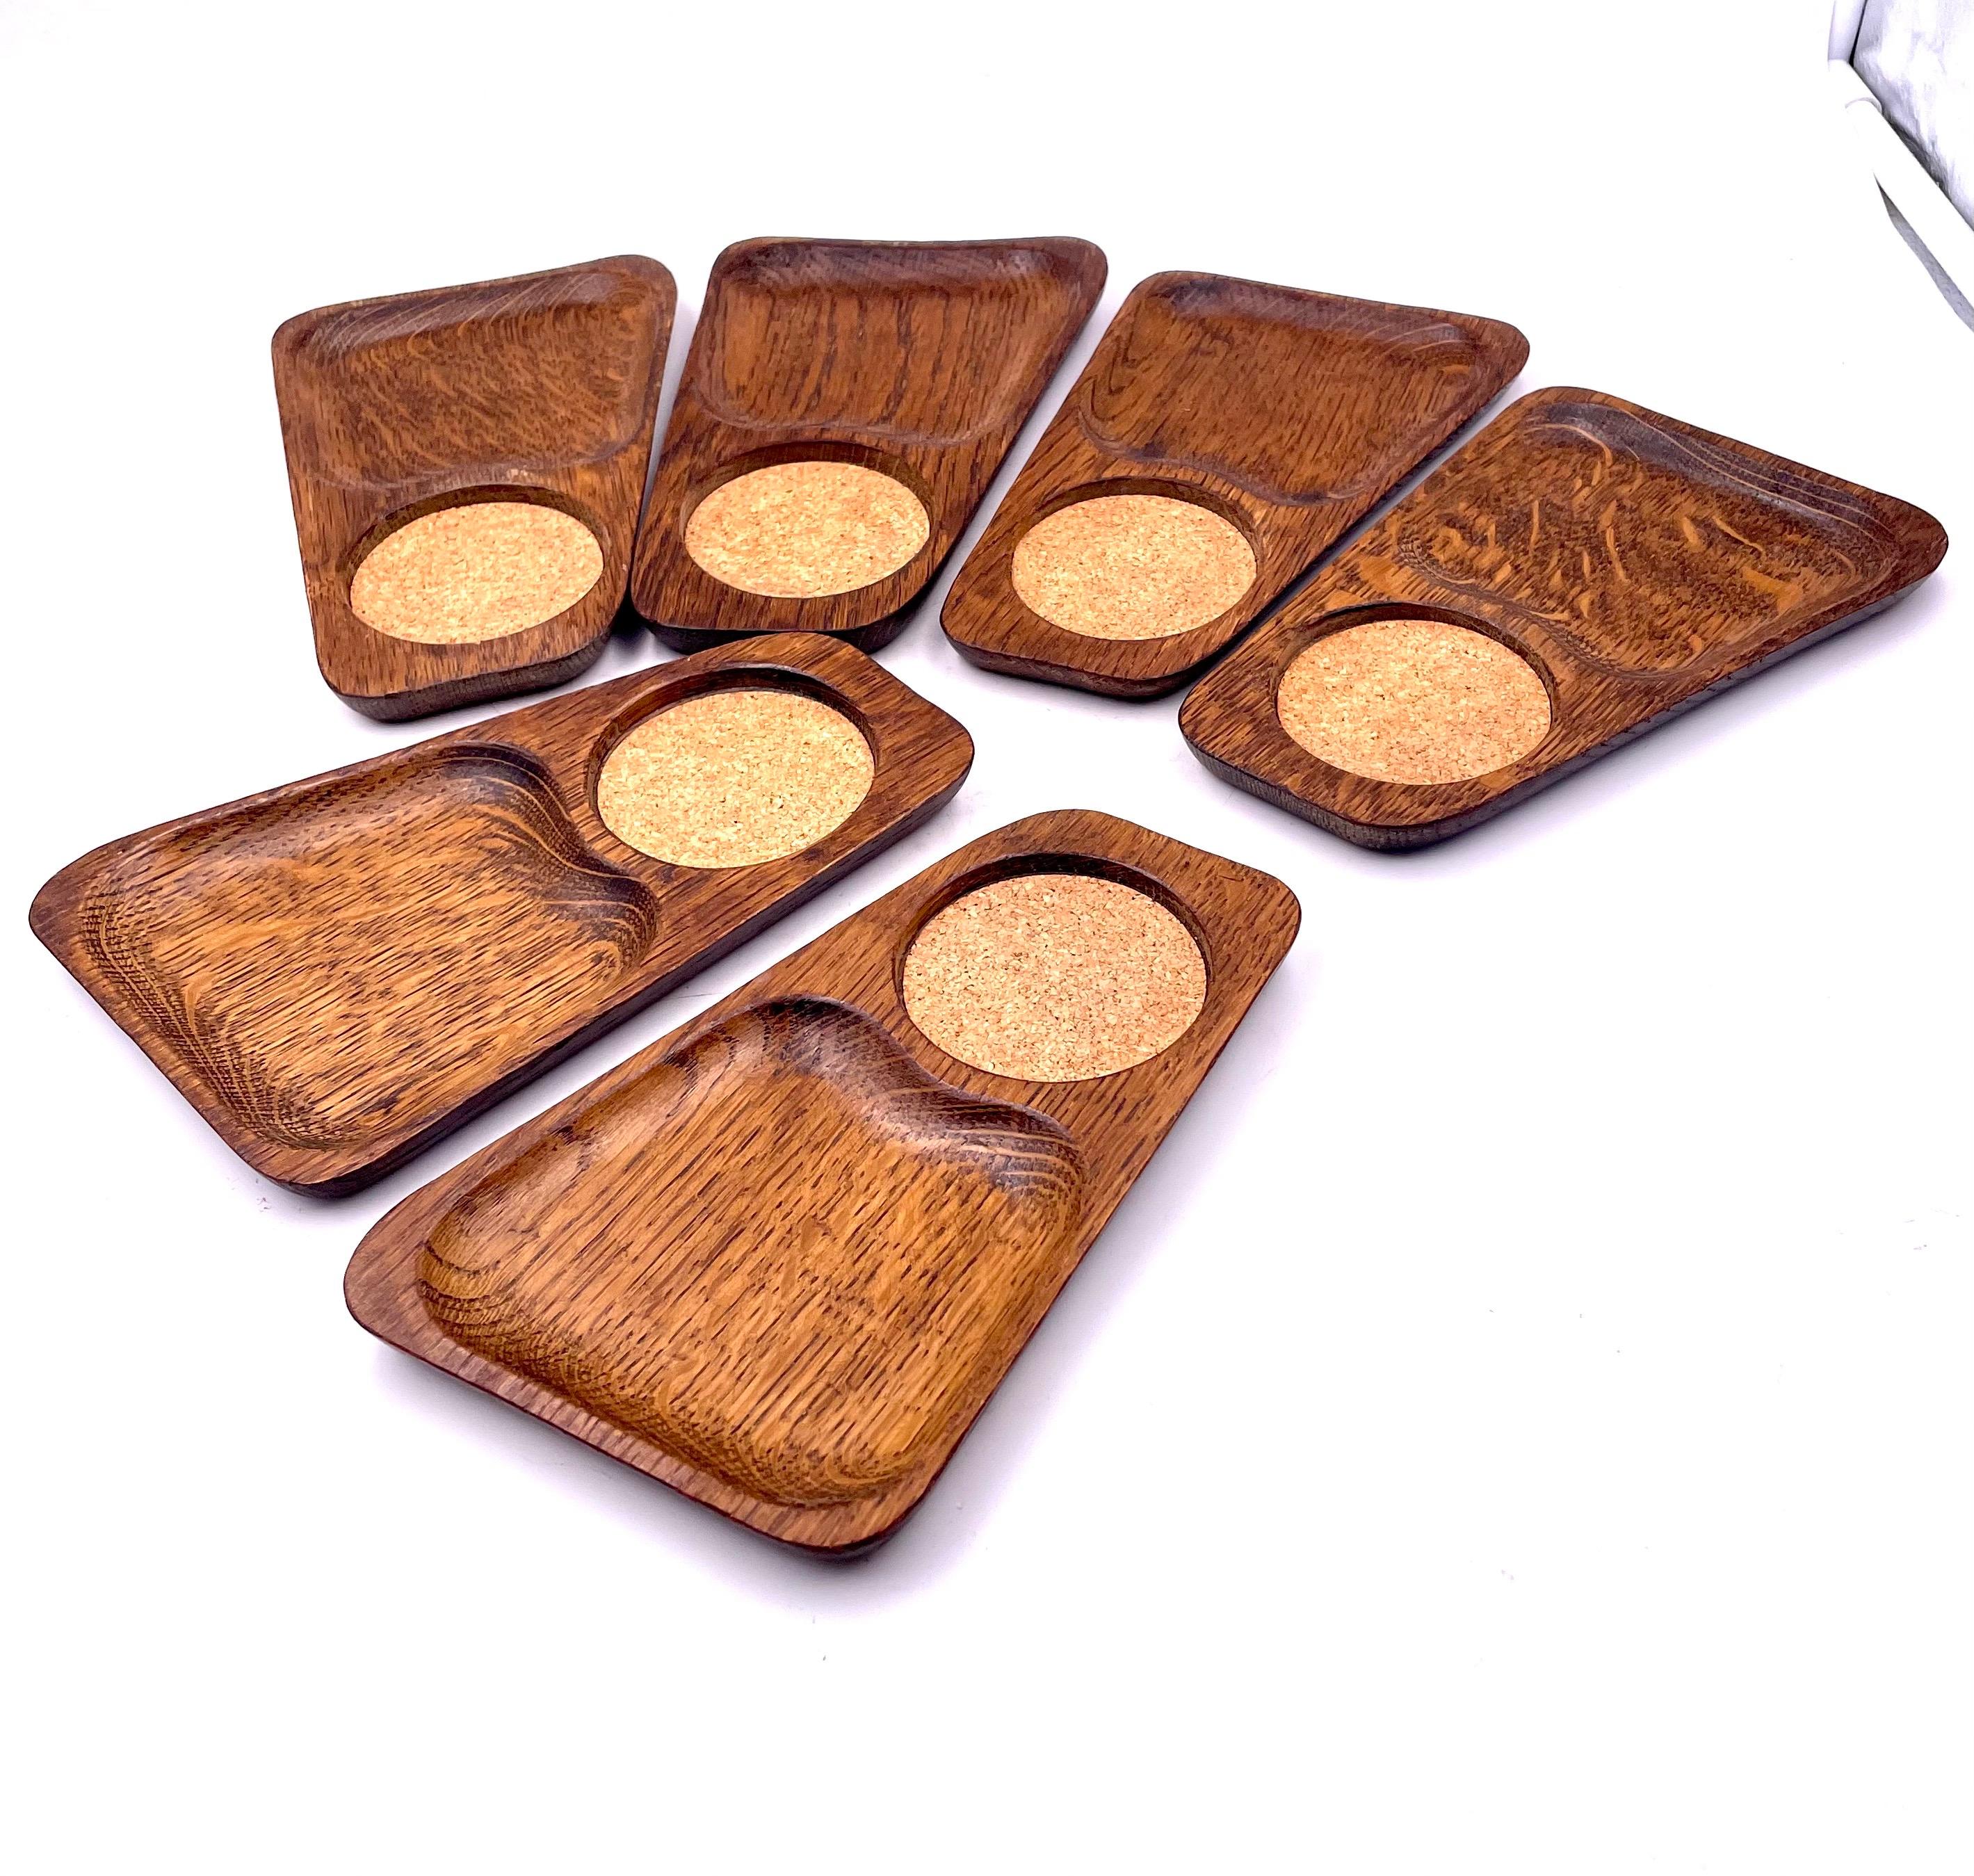 Nice set of 6 snack serving trays in the style of Don Shoemaker. Solid carved oak versatile with cork insert for a drink, great for parties.